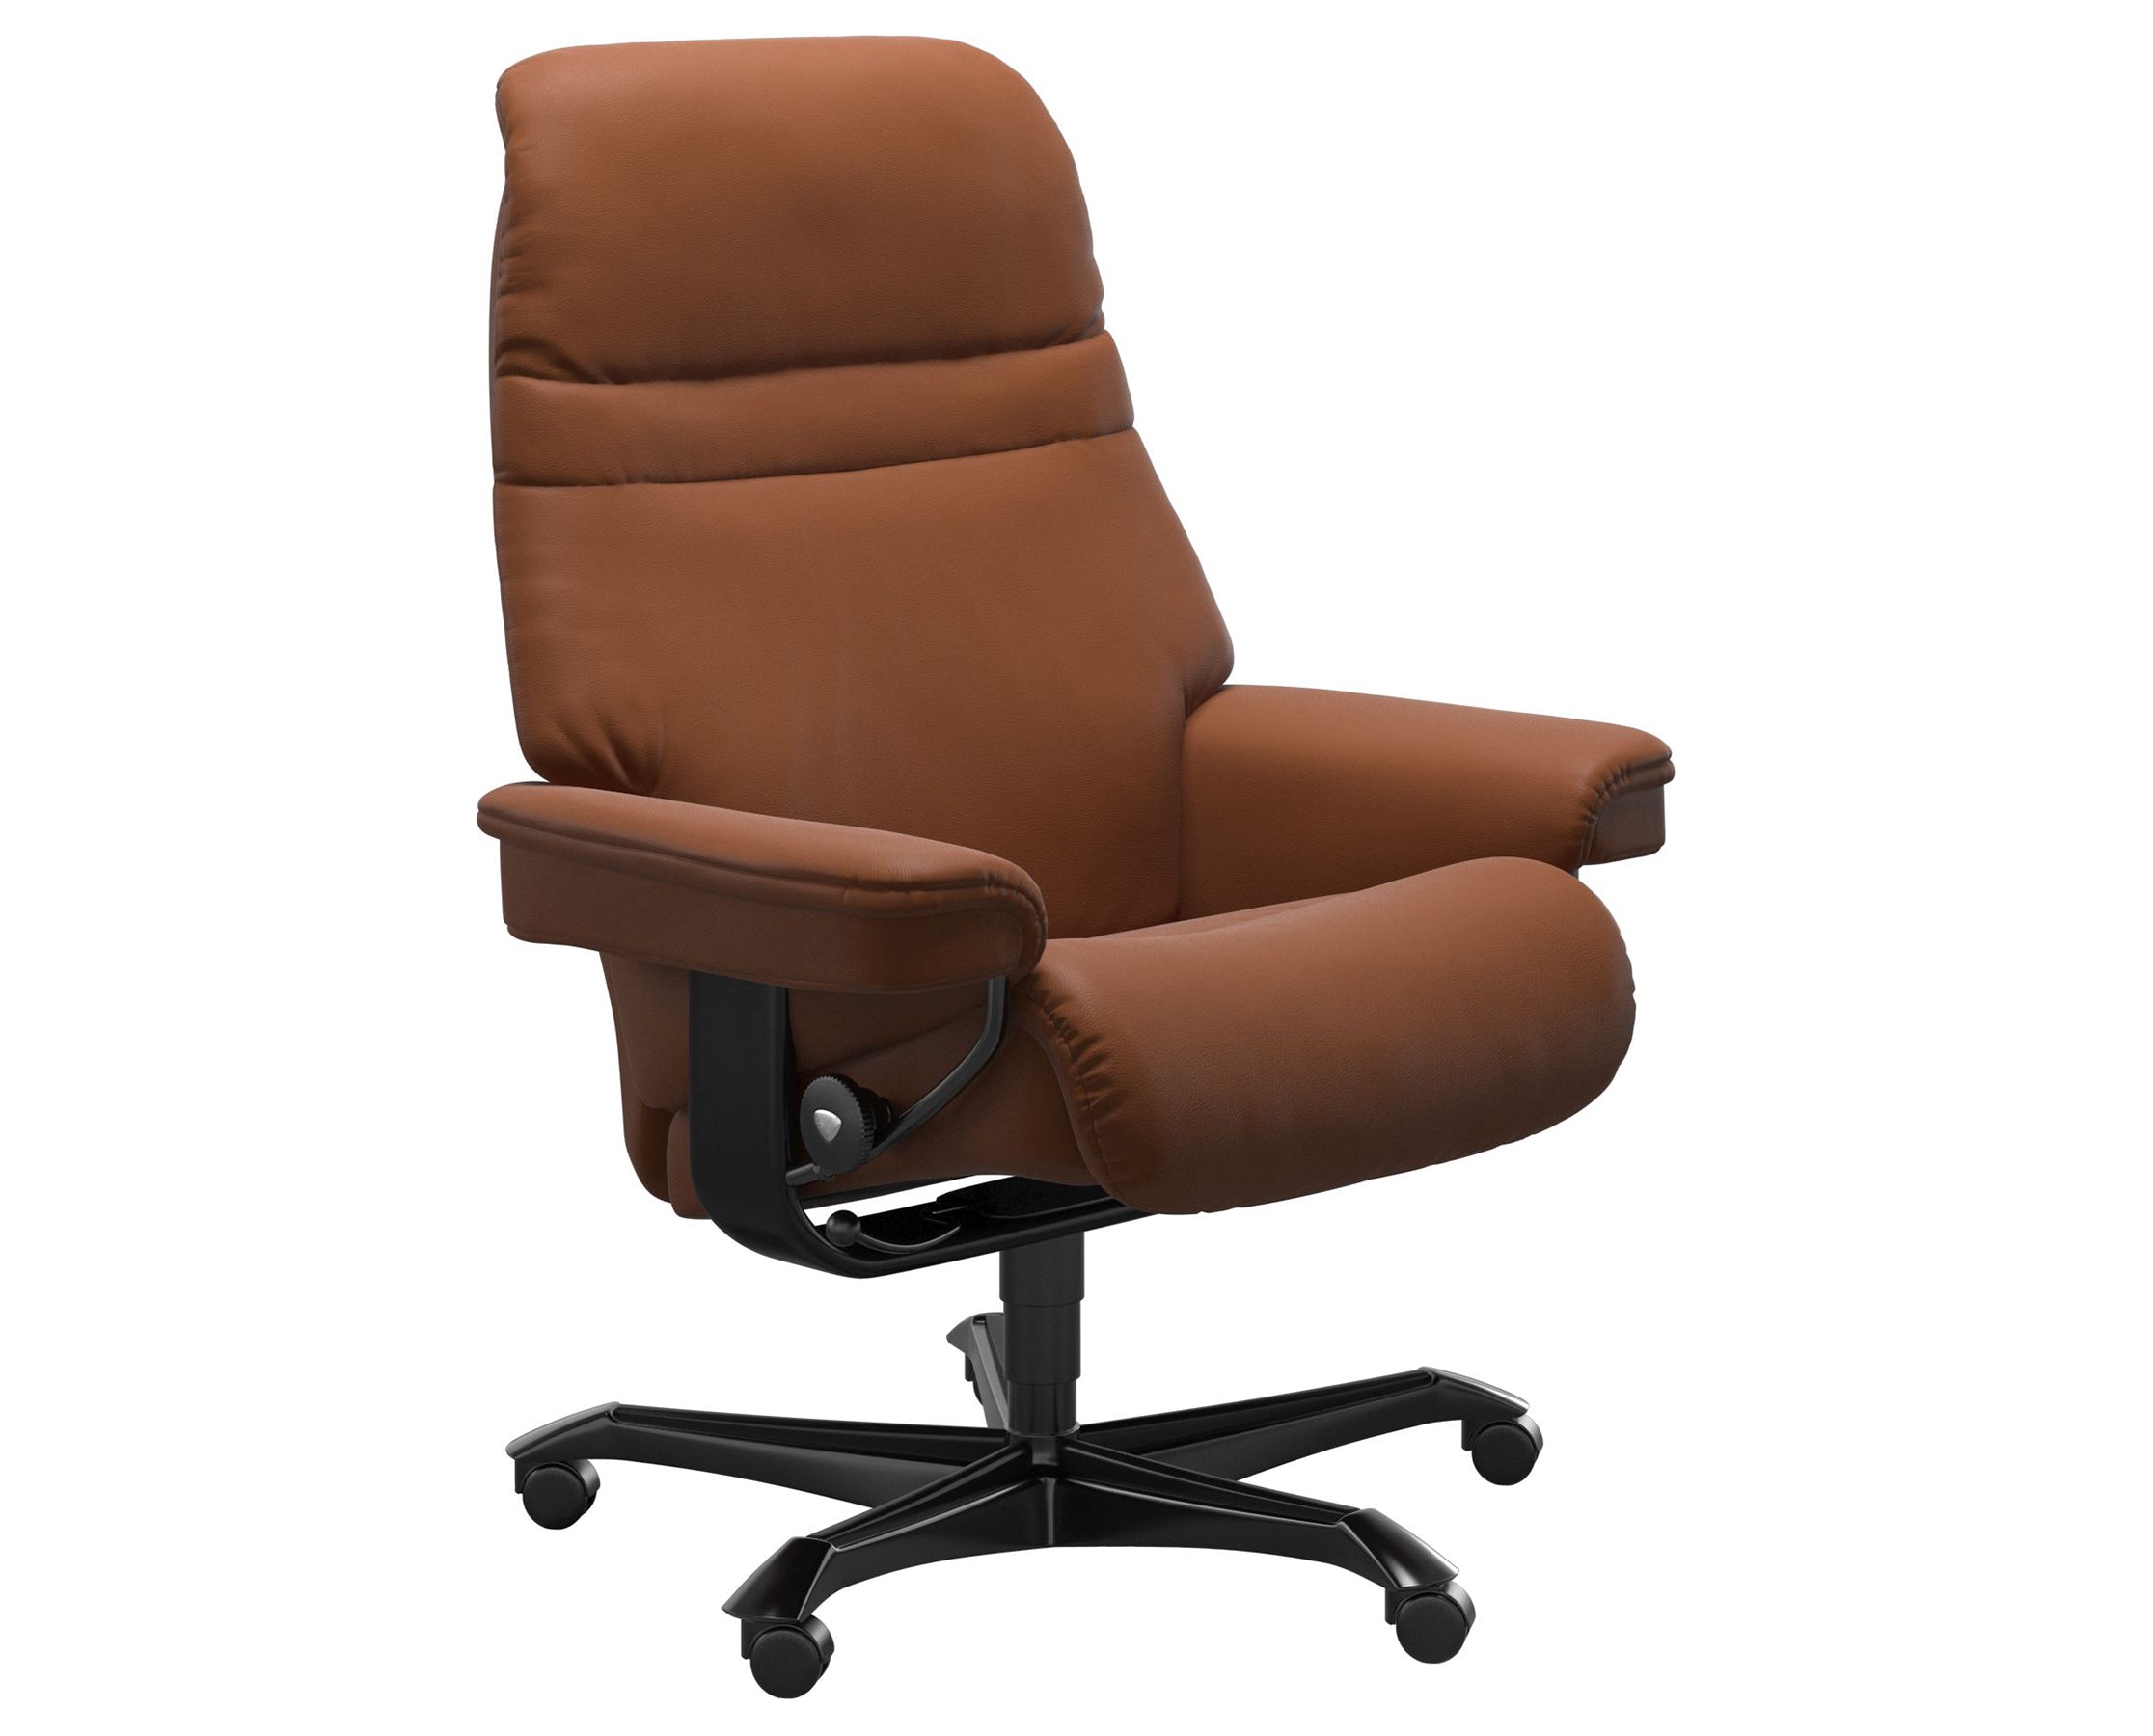 Paloma Leather New Cognac M and Black Base | Stressless Sunrise Home Office Chair | Valley Ridge Furniture